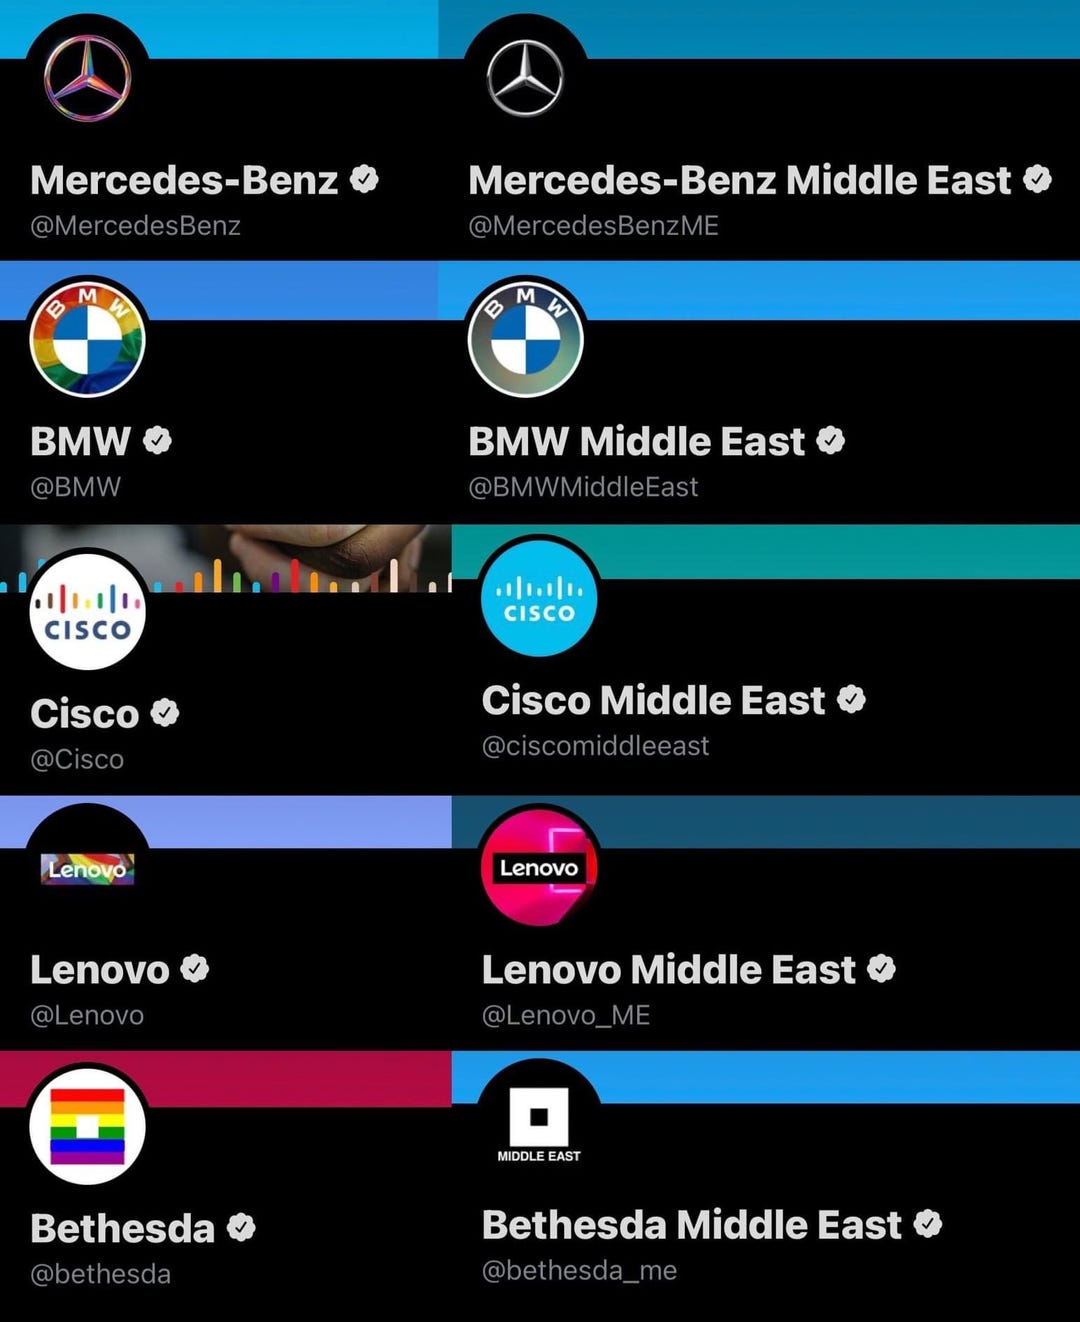 May be a graphic of 1 person and text that says 'Mercedes-Benz Benz @MercedesBenz Mercedes-Benz Middle East @MercedesBenzME BMW @BMW BMW Middle East @BMWMi iddleEast @ 小小 CISCO 小小 CISCO Cisco @Cisco Cisco Middle East @ciscomiddleeast @ciscom Lenovo Lenovo Lenovo @Lenovo Lenovo Middle East enovo ME MIDDL EAST Bethesda @bethesda nesda Bethesda Middle East bethesda_'